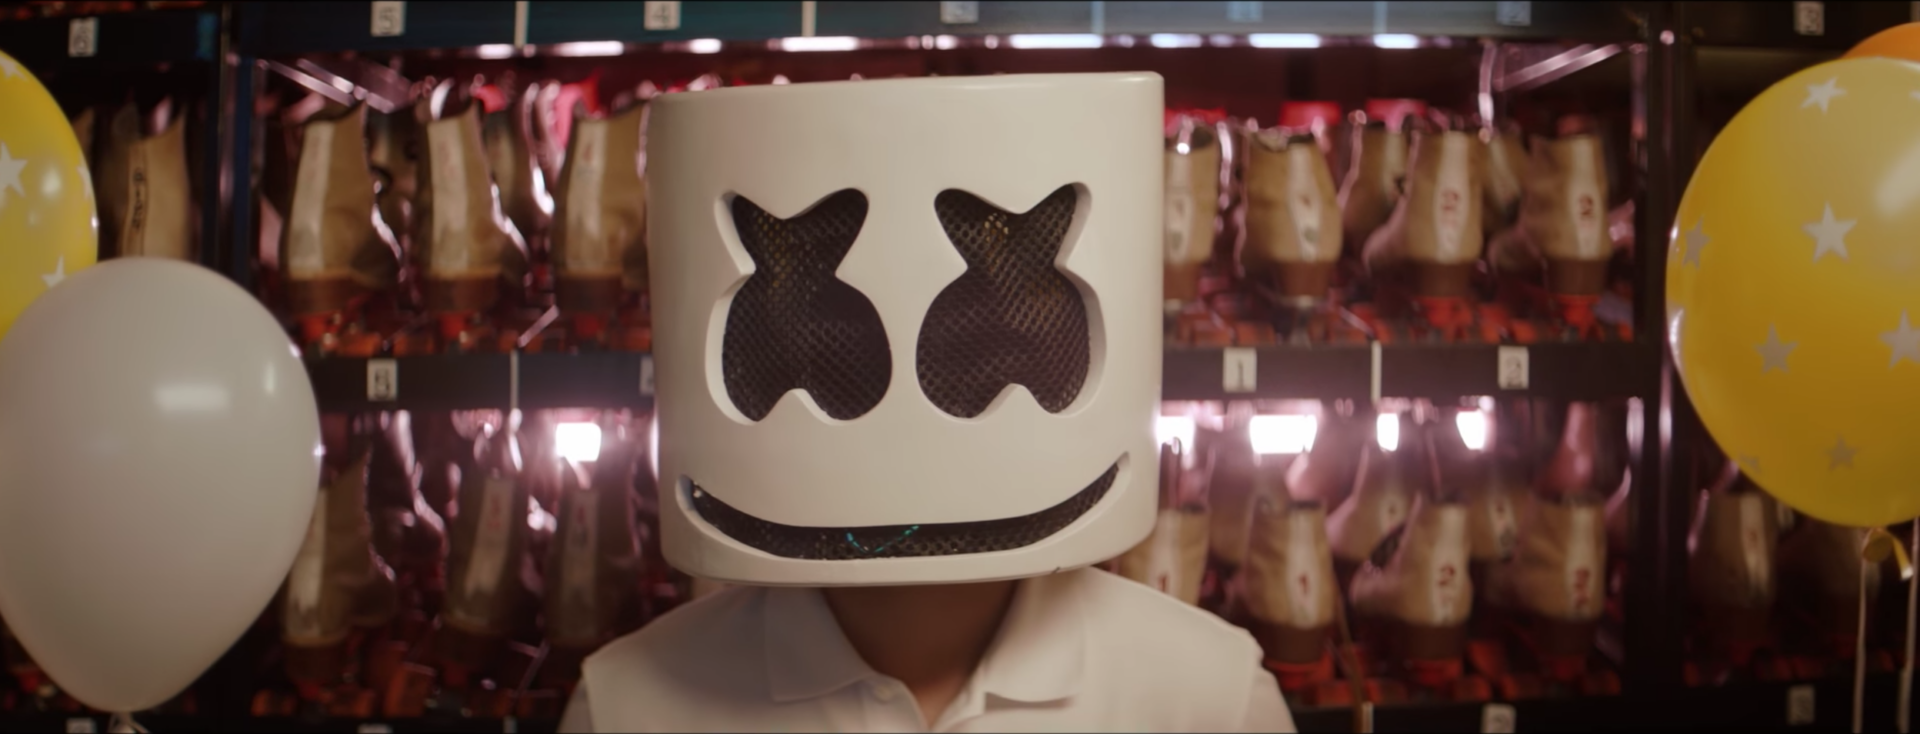 Marshmello falls in love at a roller rink in “Summer” music video